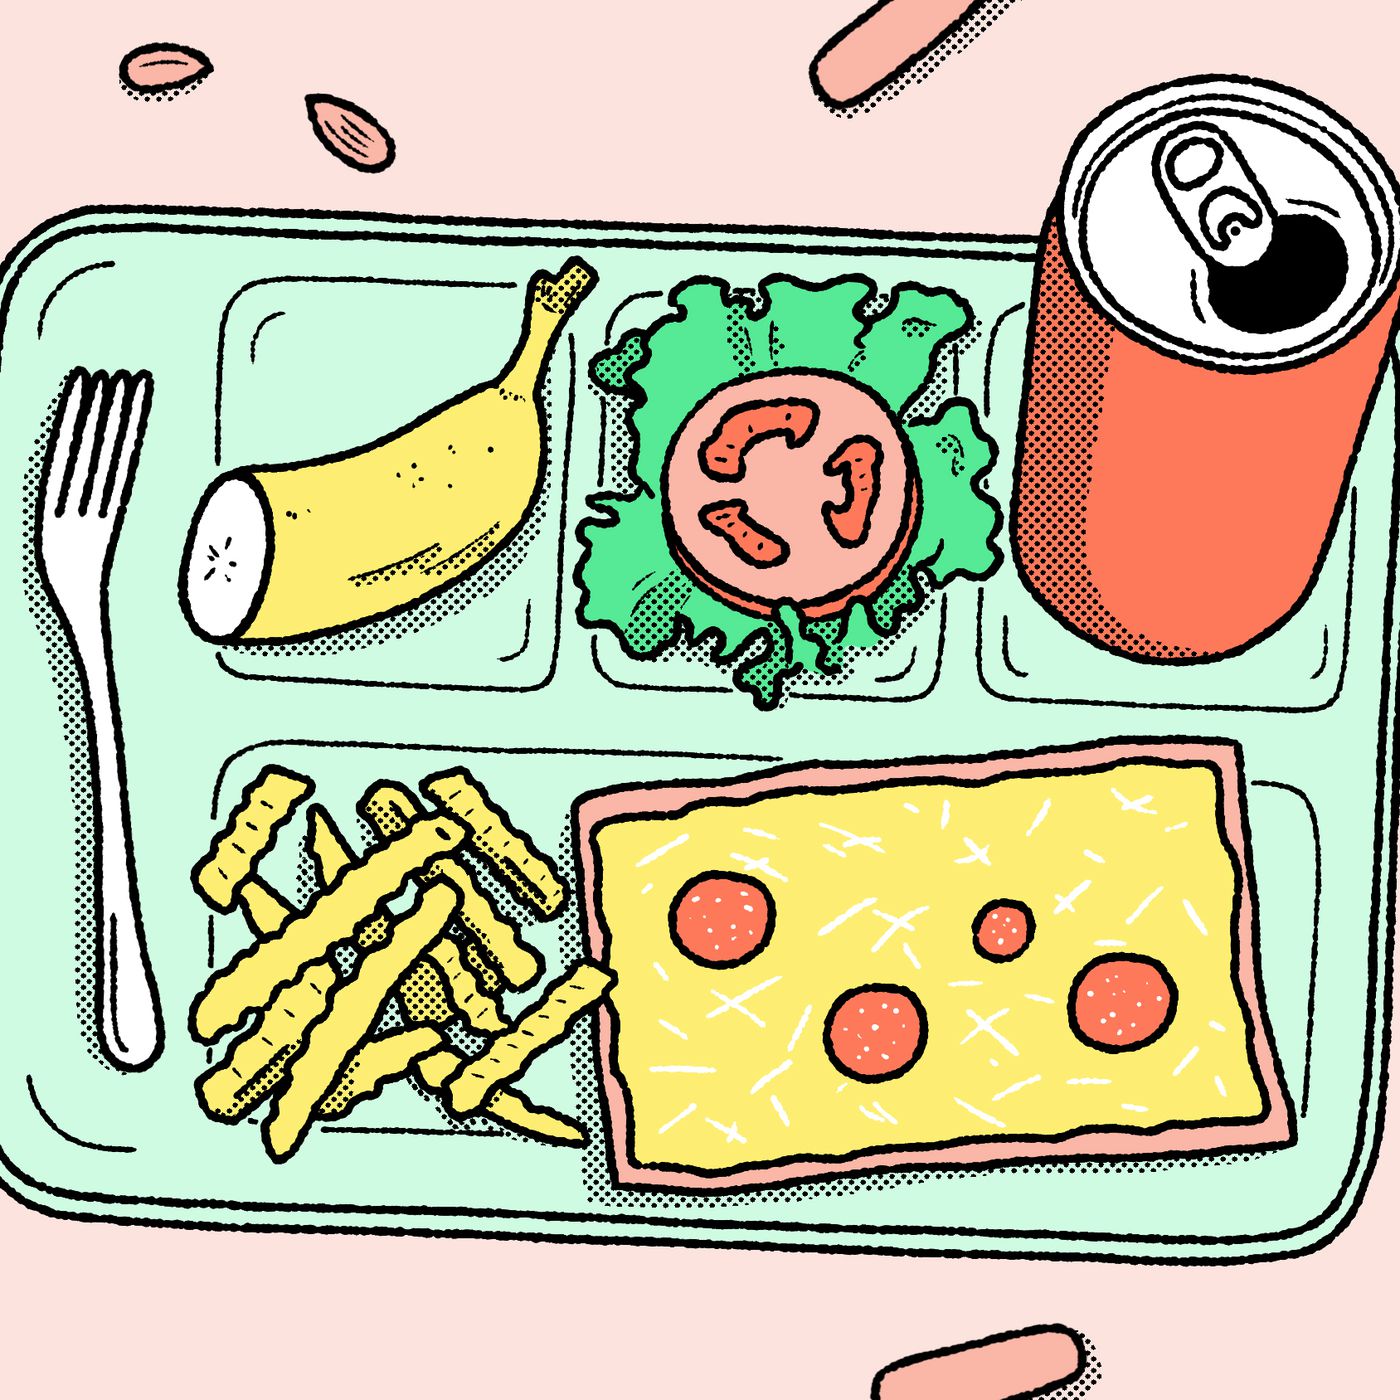 Pizza and milk: Why school lunches feel like they're frozen in time - Vox